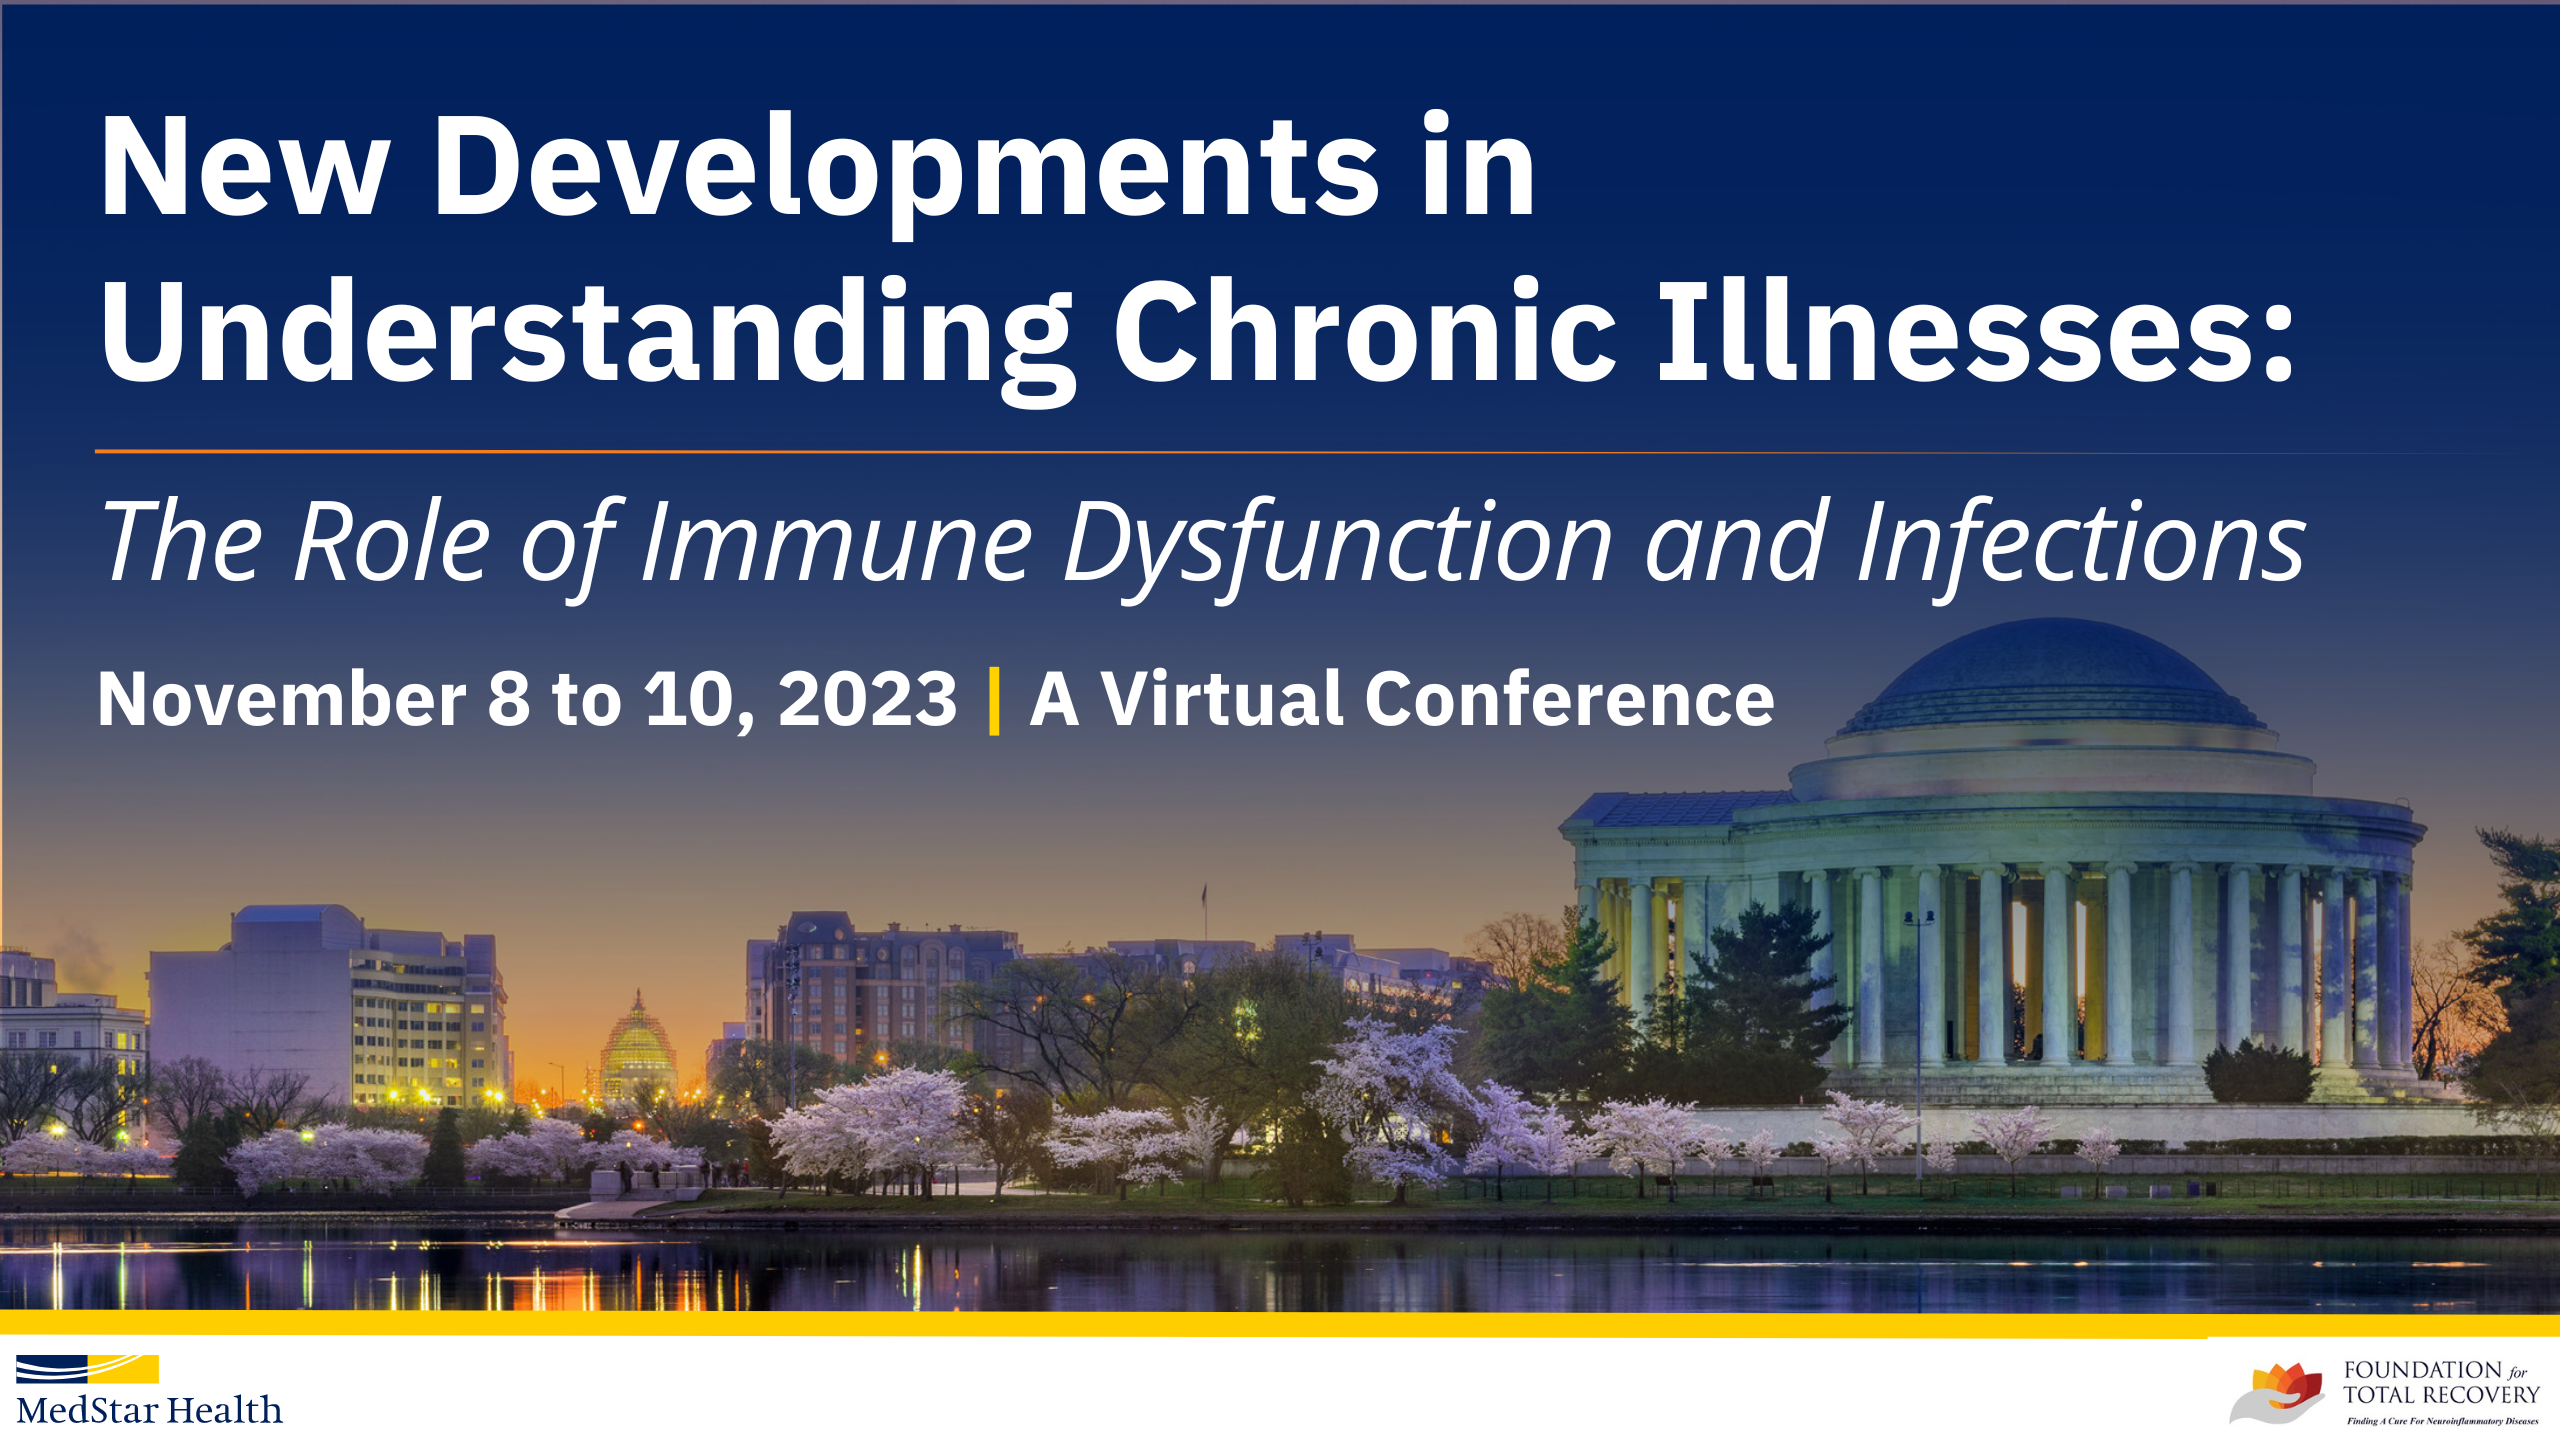 New Developments in Understanding Chronic Illnesses: The Role of Immune Dysfunction and Infections